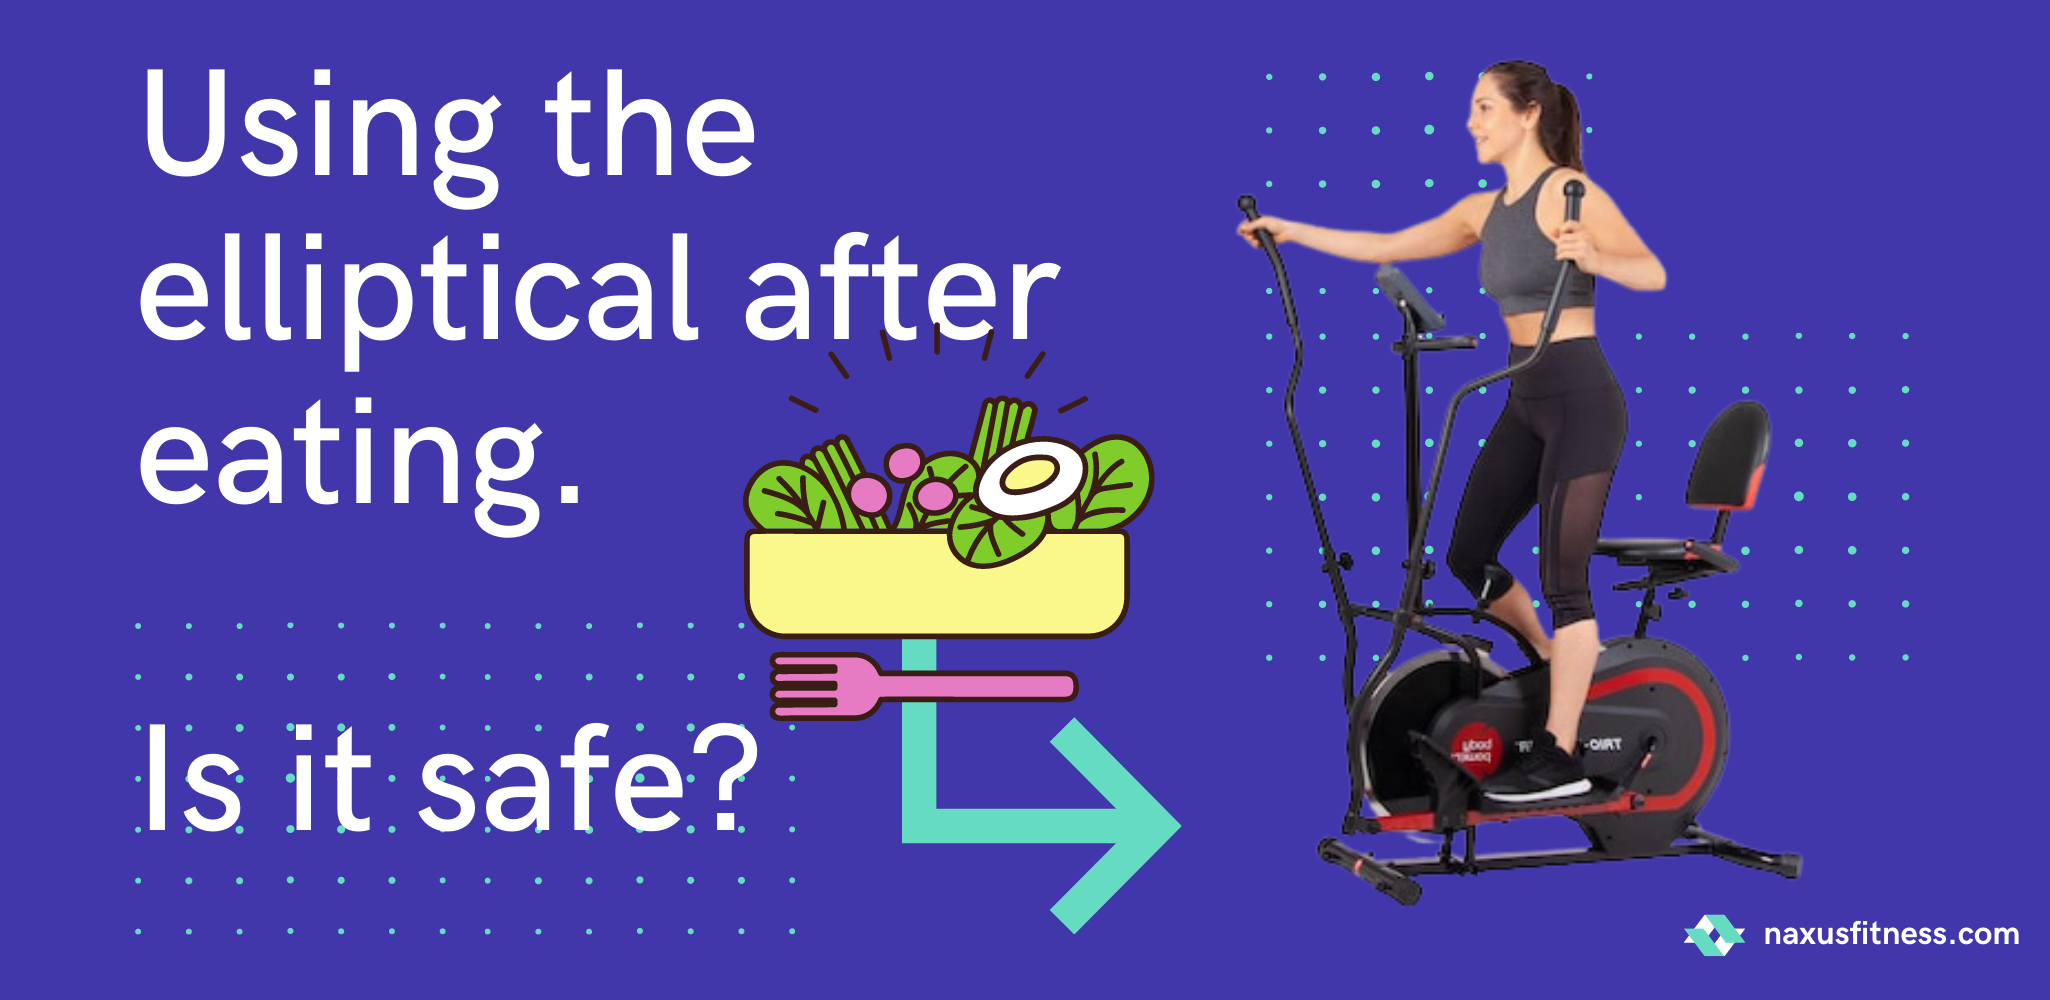 can I use an elliptical after eating